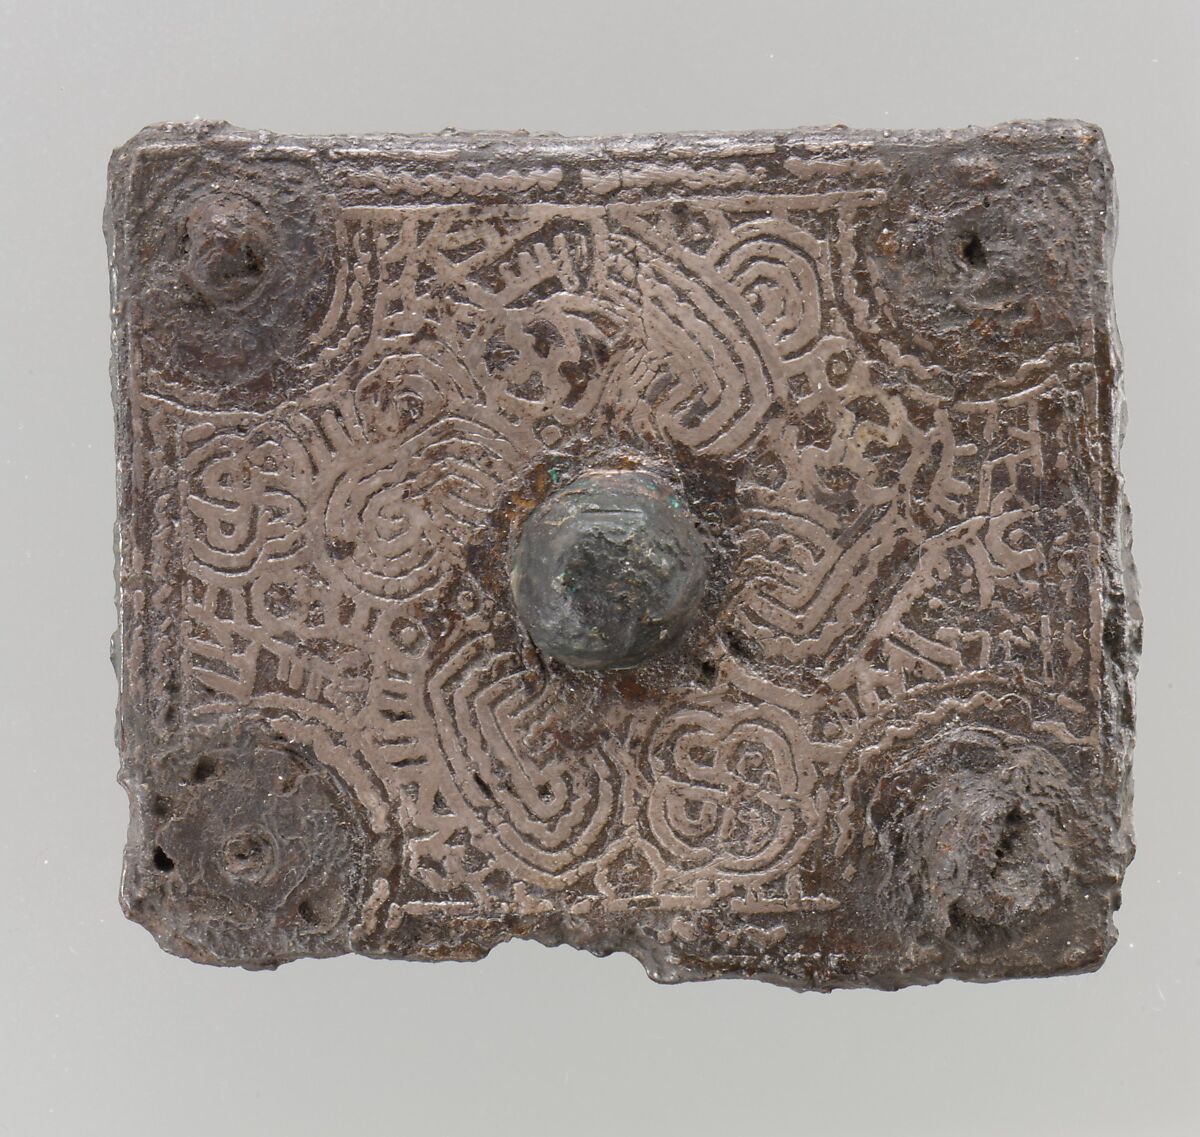 Backplate of a Belt Buckle, Iron, silver inlay, copper alloy, Frankish 